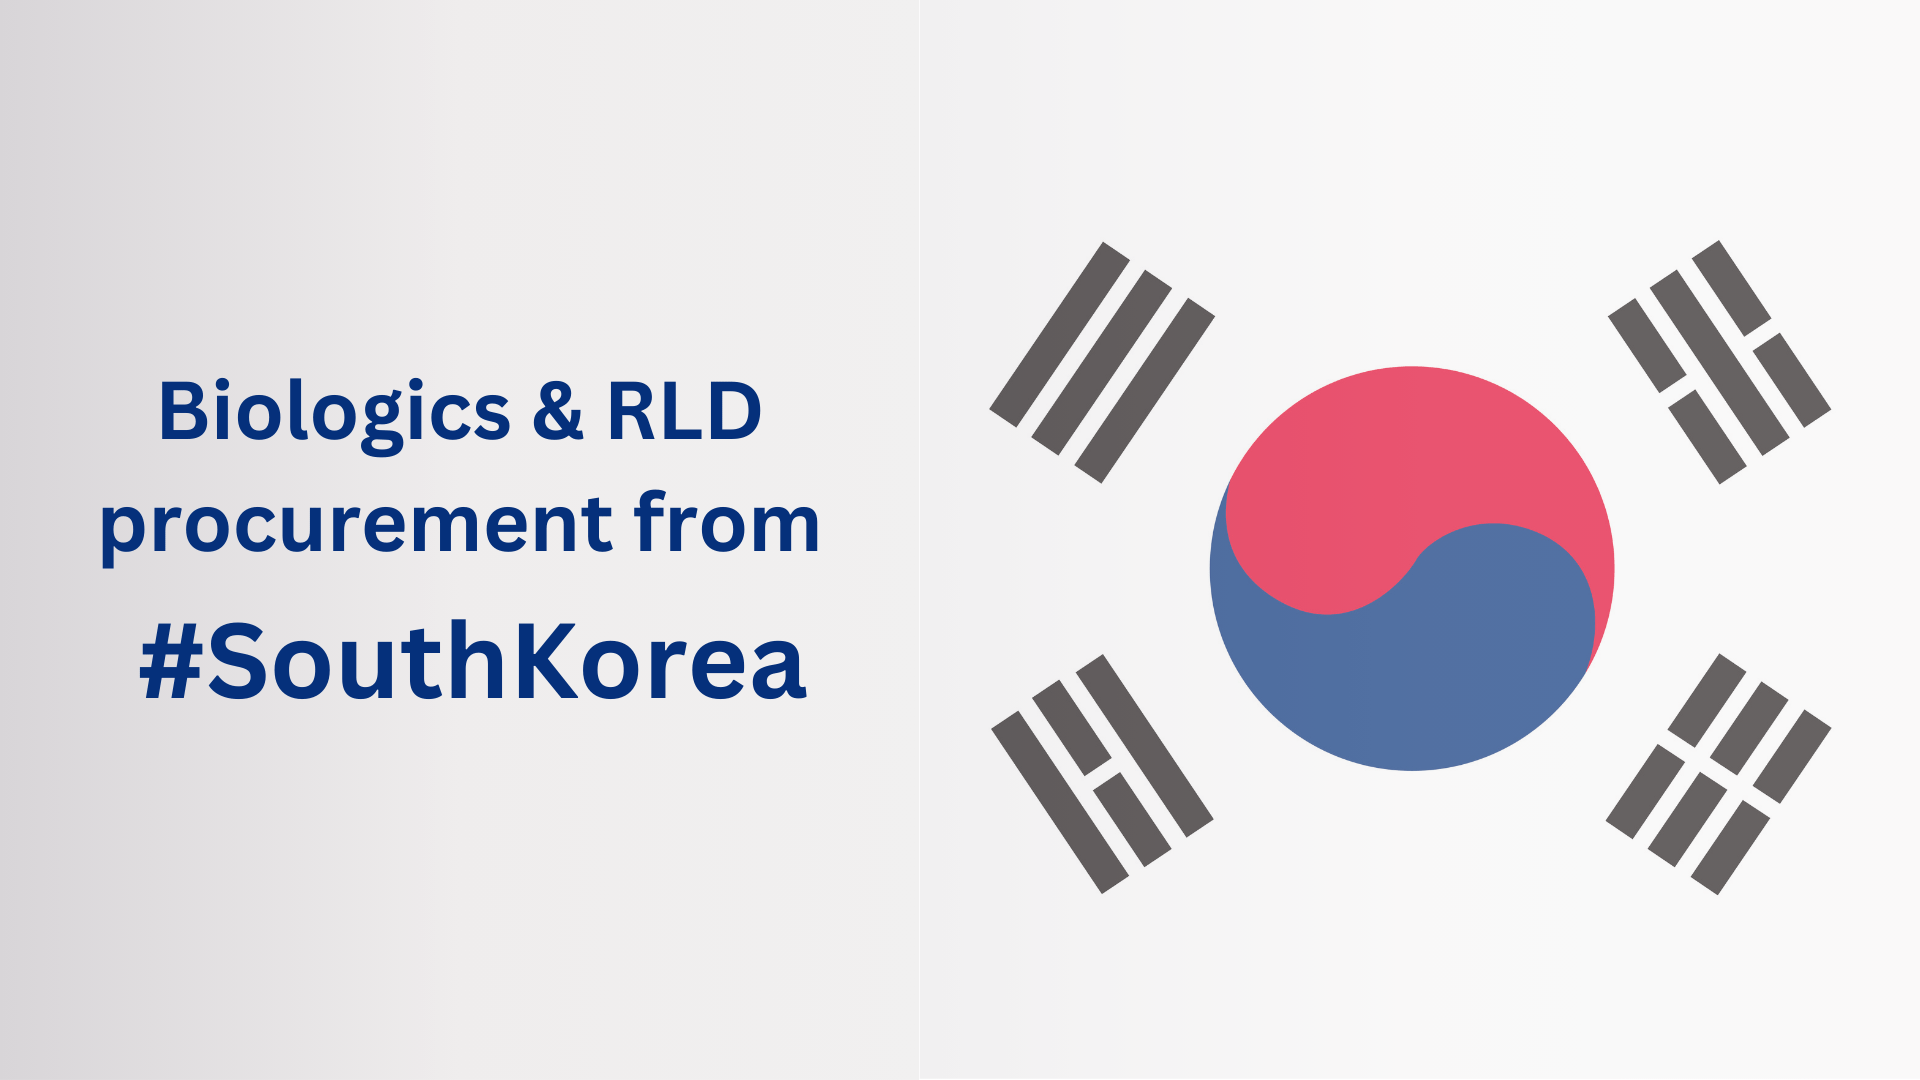 Sourcing of RLD from South Korea